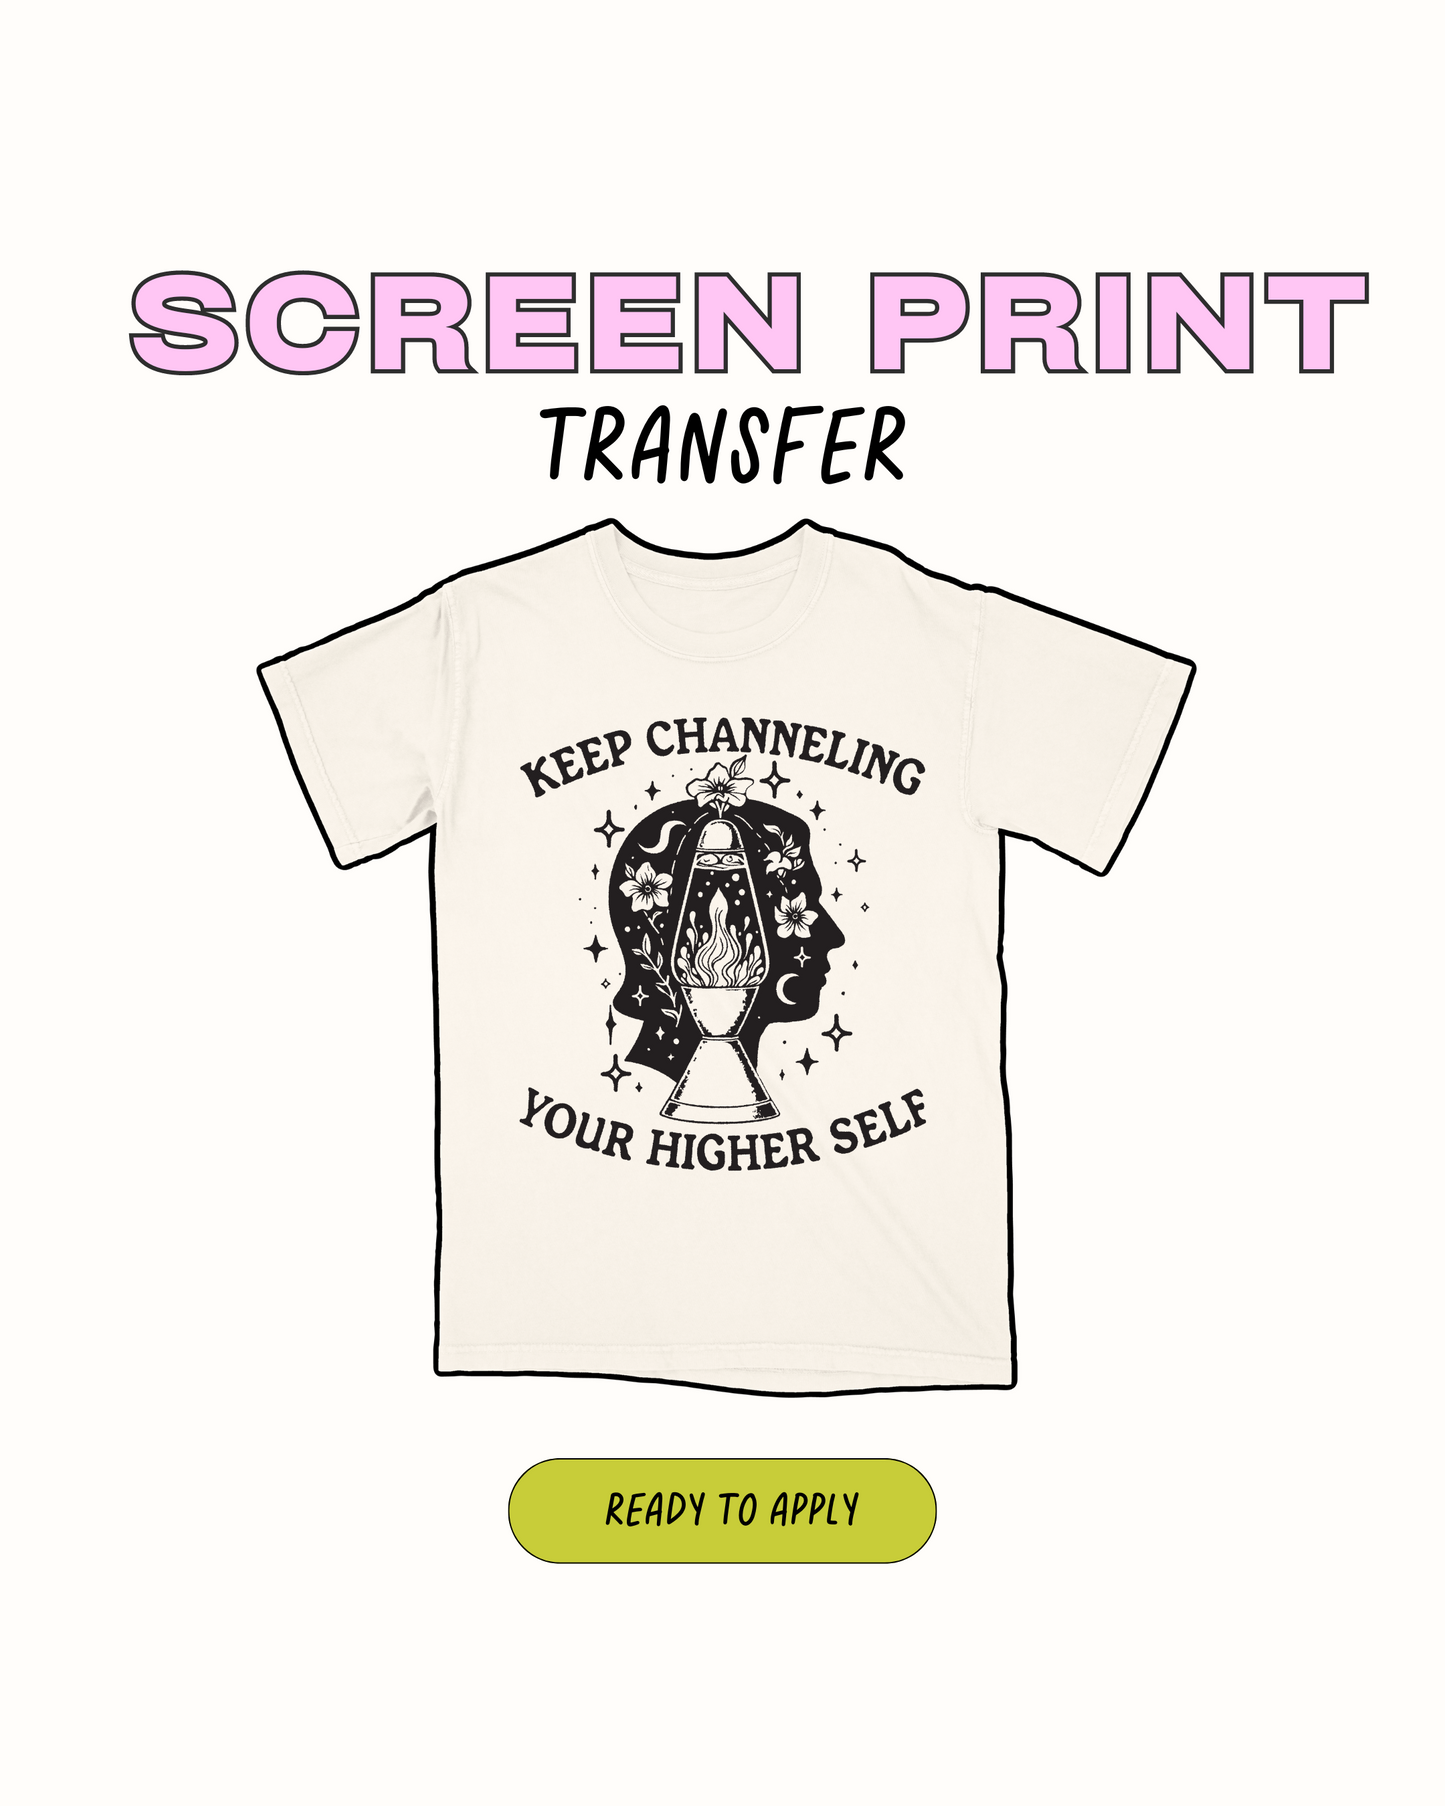 Your higher self - Screen print (RTS)